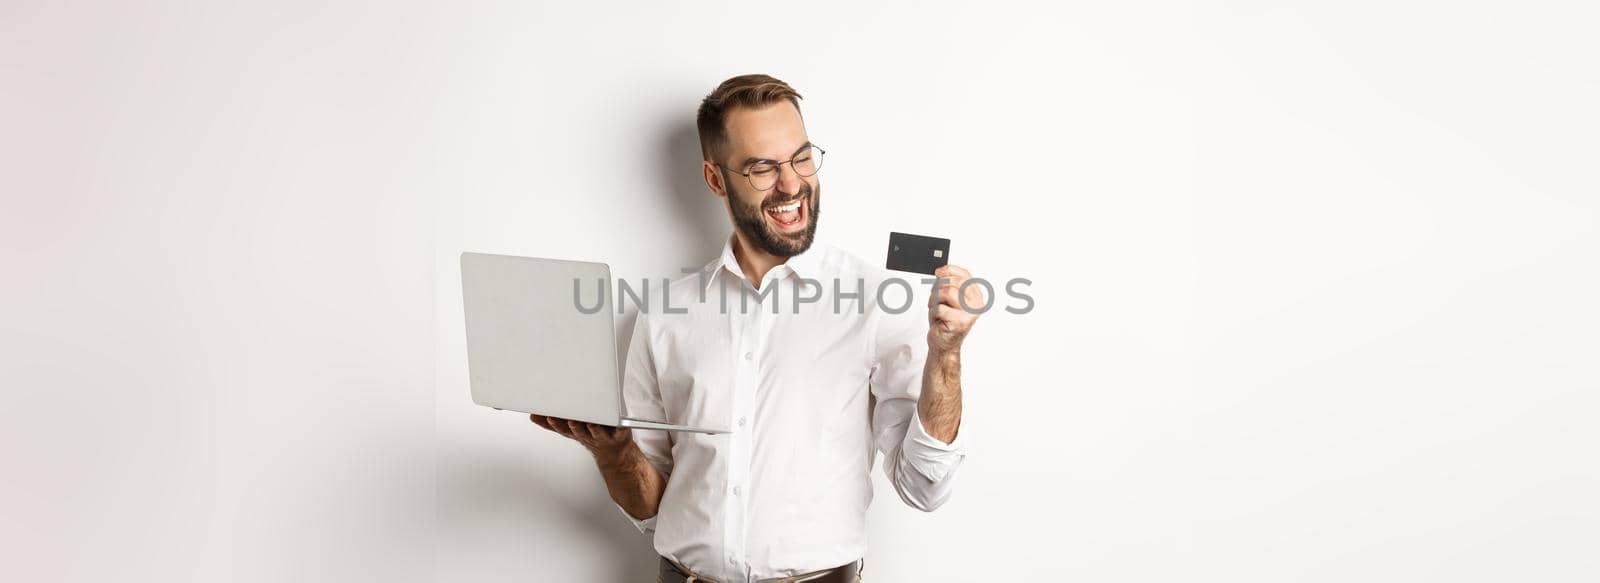 Online shopping. Satisfied handsome man looking at credit card after making order internet, using laptop, standing over white background.